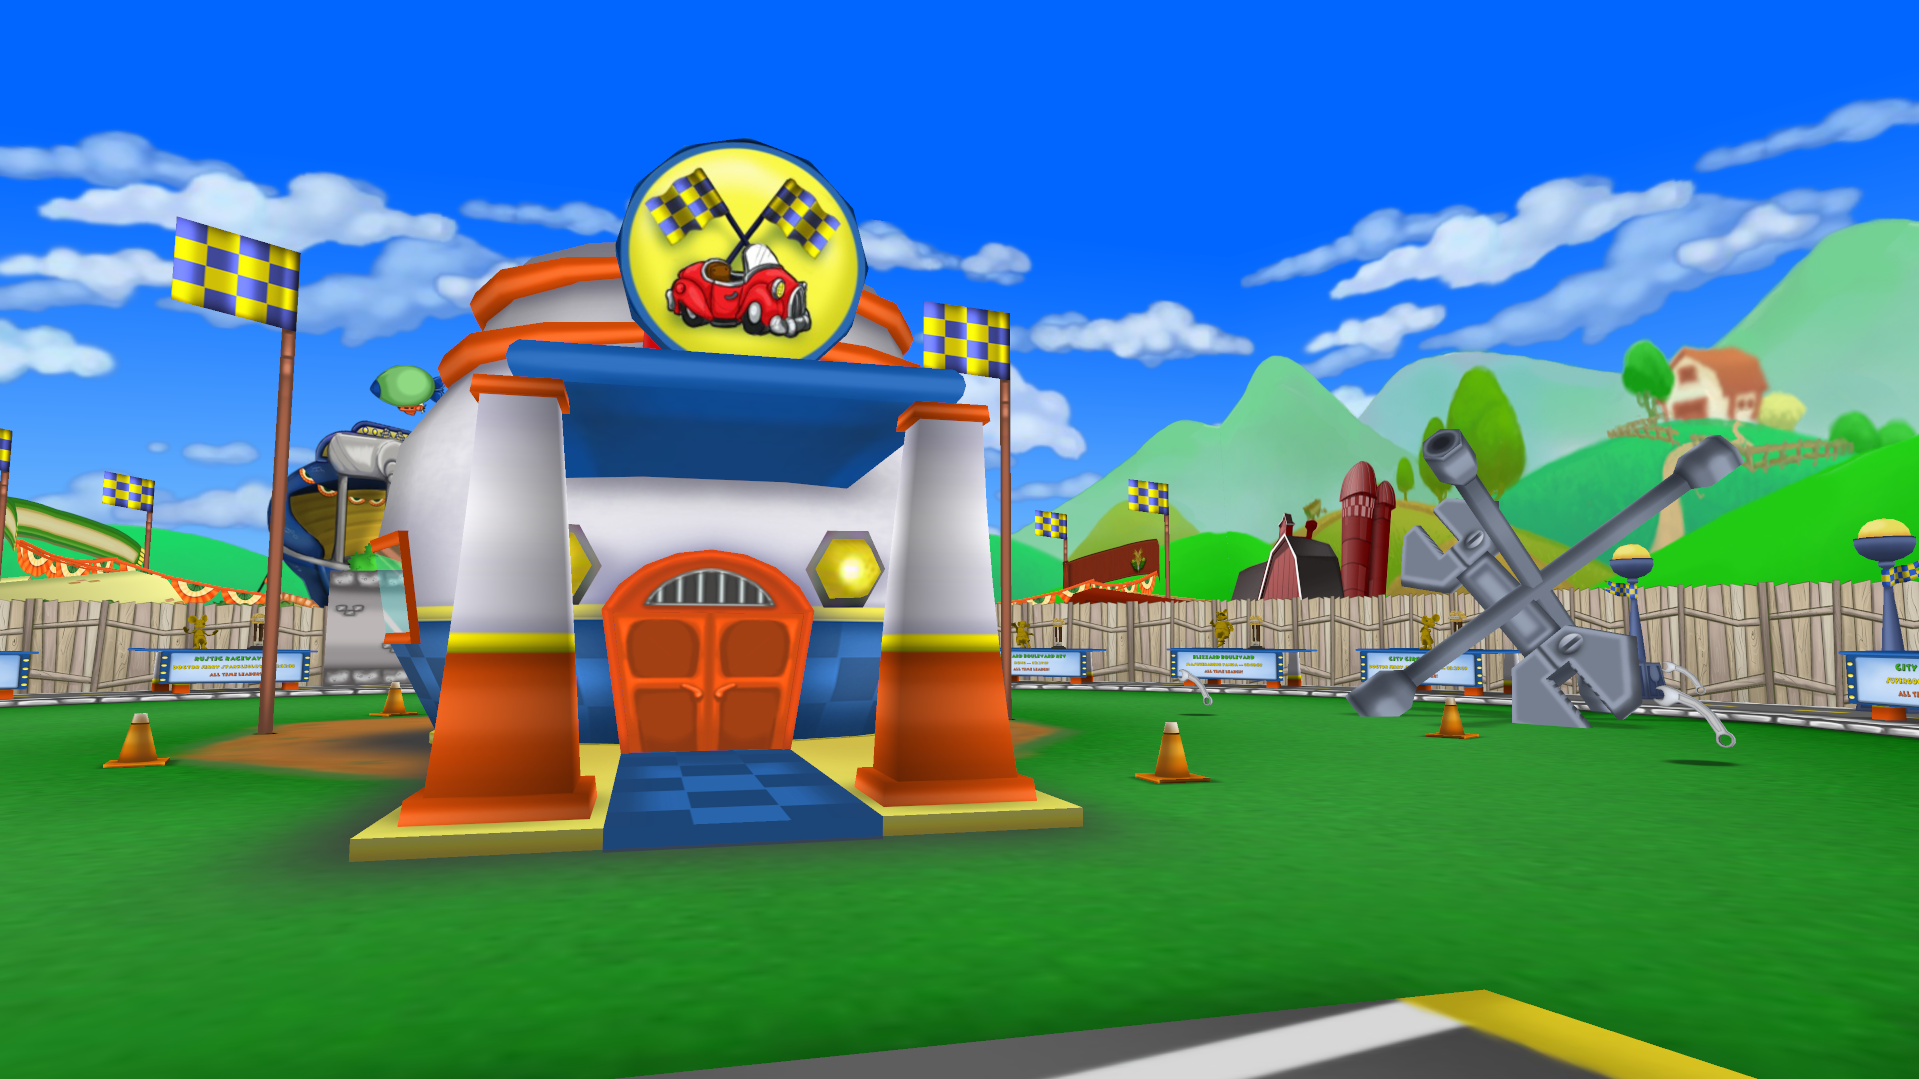 Play  Toontown: Corporate Clash